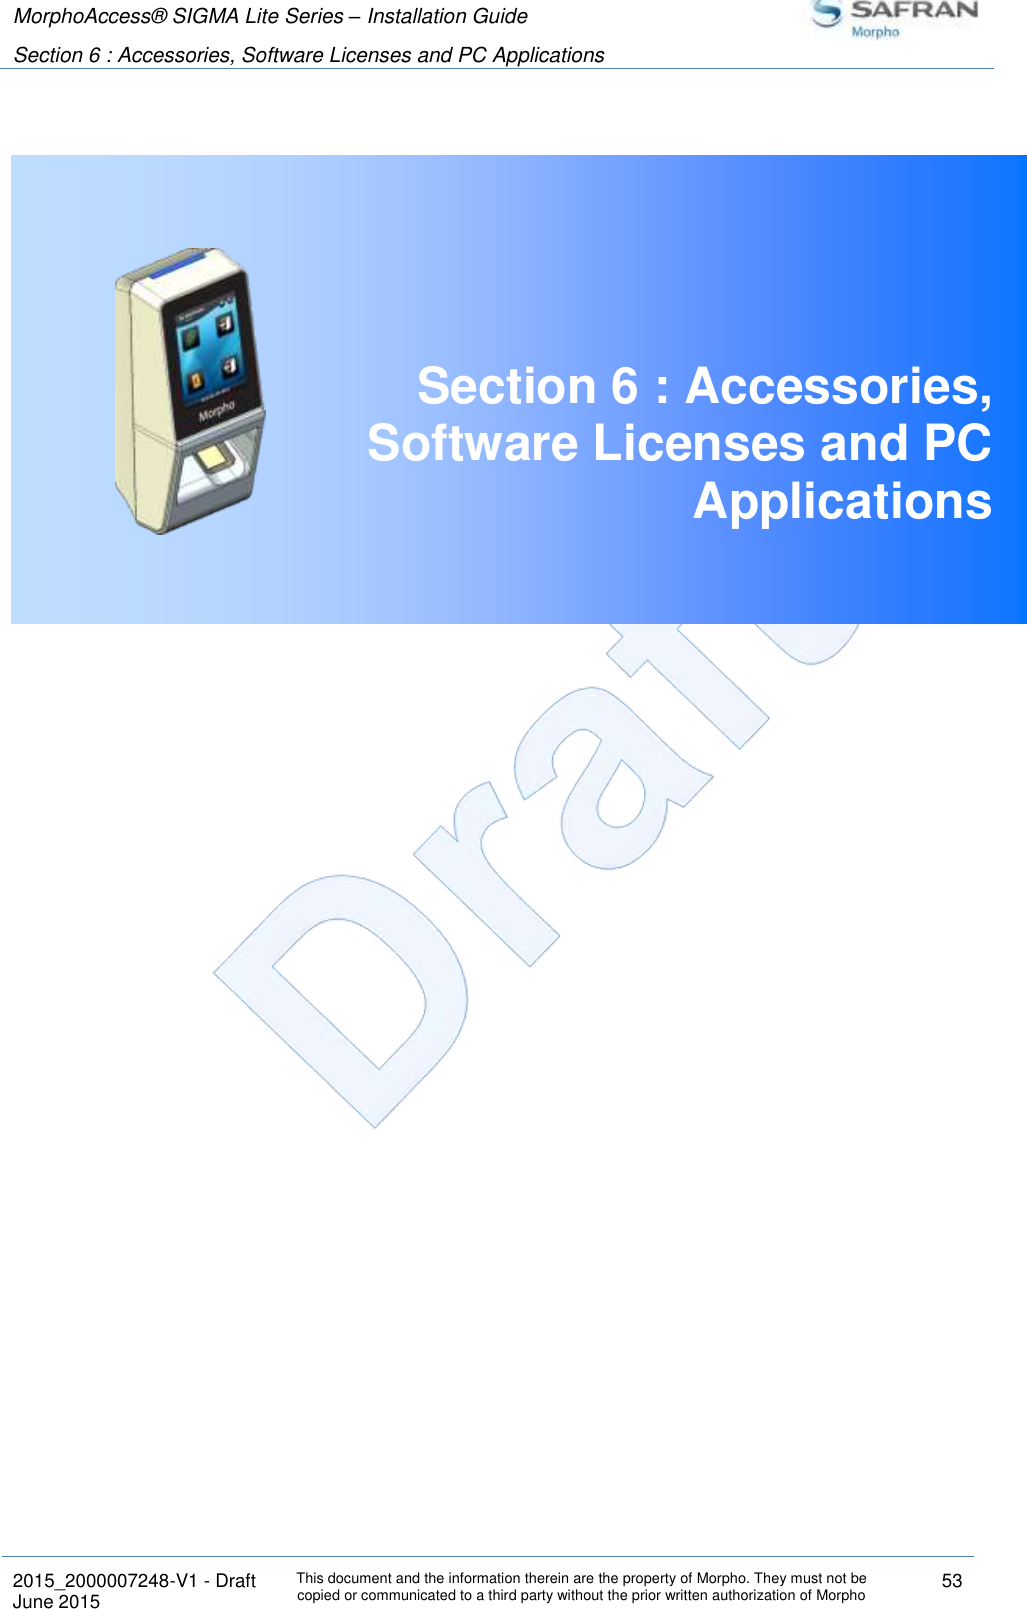 MorphoAccess® SIGMA Lite Series – Installation Guide  Section 6 : Accessories, Software Licenses and PC Applications   2015_2000007248-V1 - Draft This document and the information therein are the property of Morpho. They must not be copied or communicated to a third party without the prior written authorization of Morpho 53 June 2015    Section 6 : Accessories, Software Licenses and PC Applications     